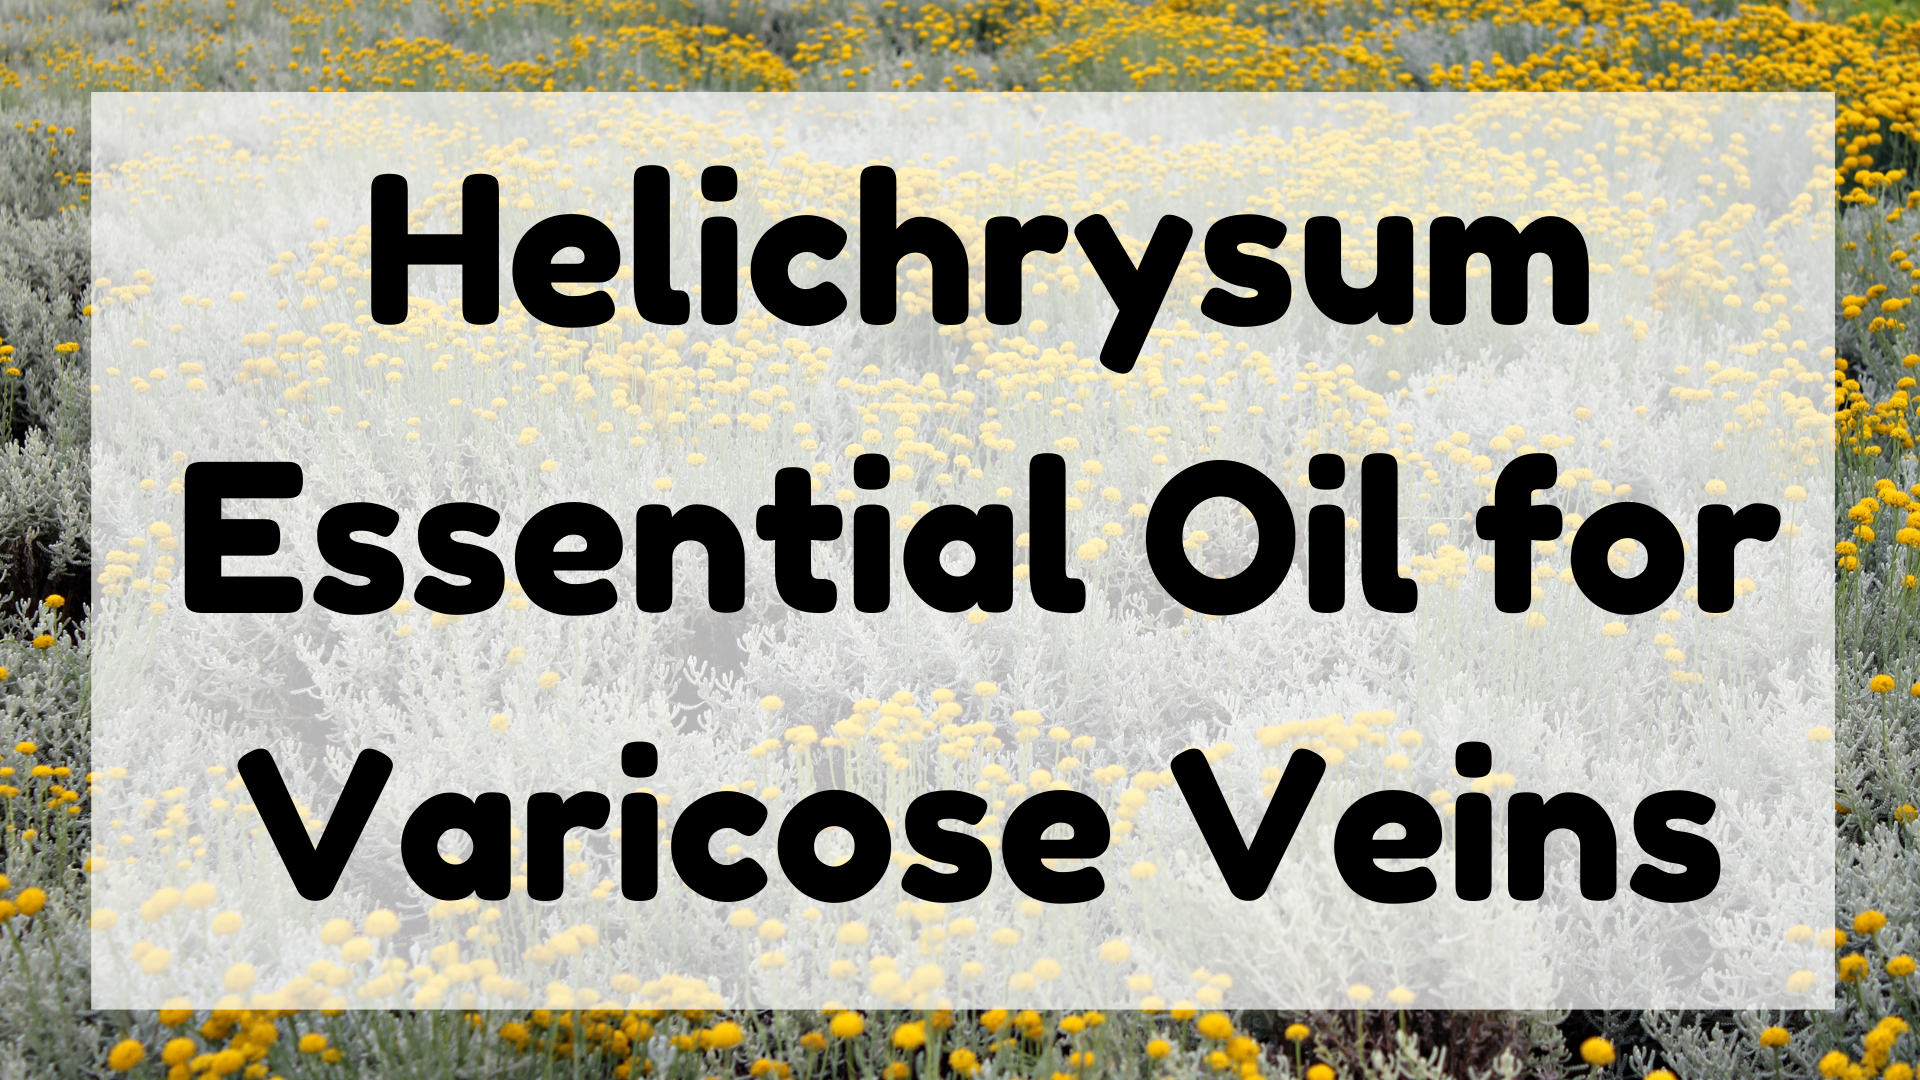 Helichrysum Essential Oil for Varicose Veins featured image